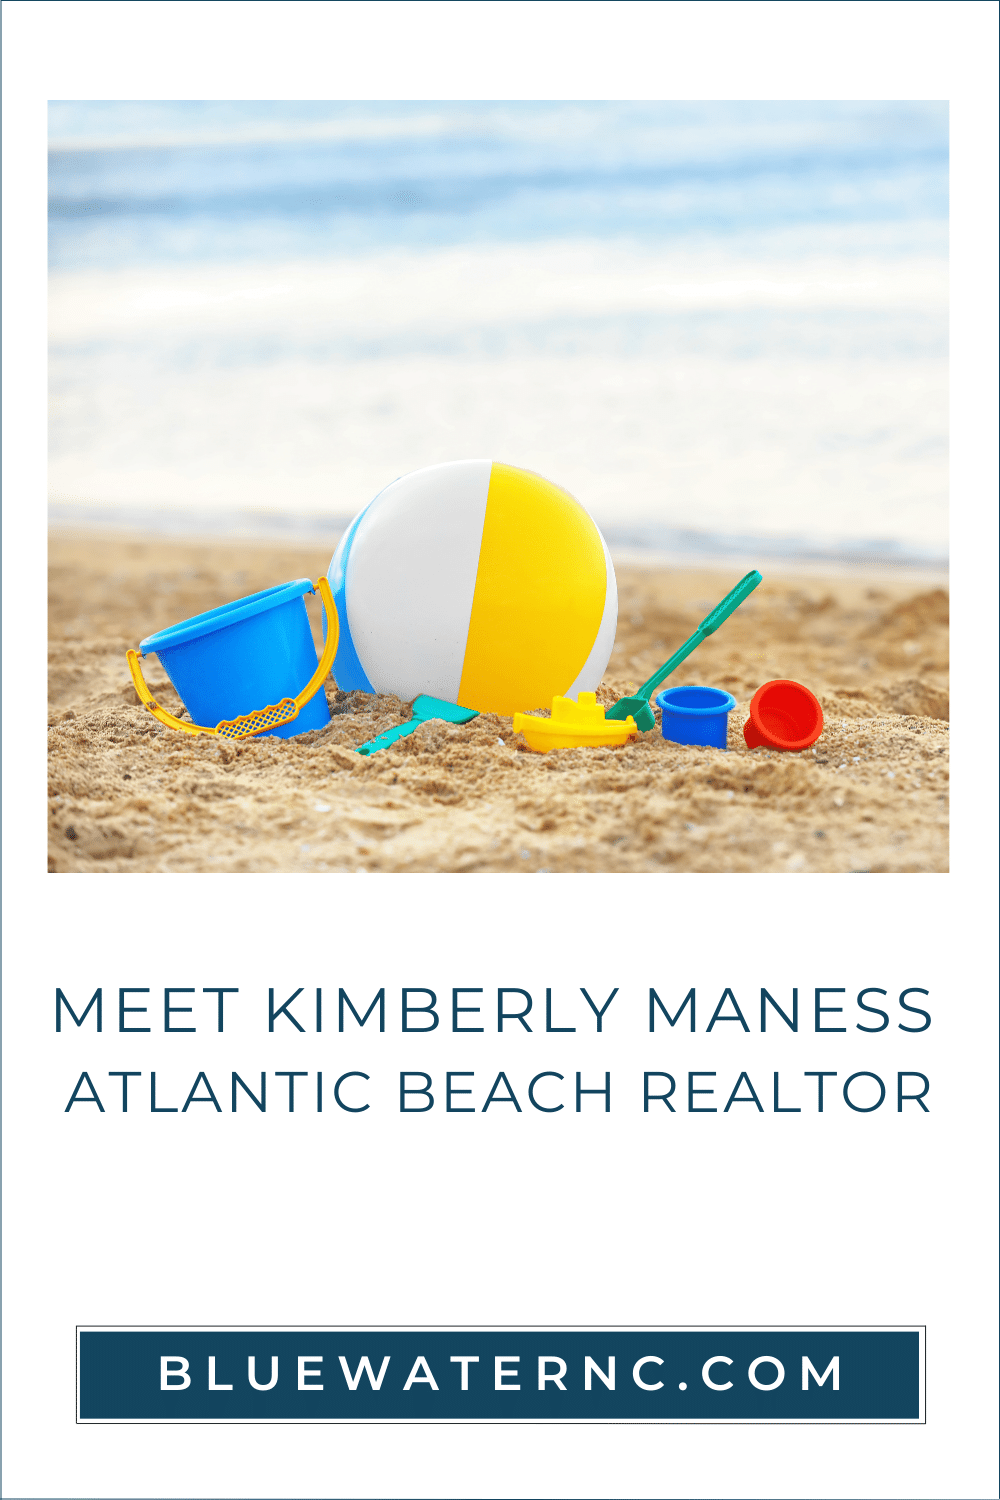 Learn more about Atlantic Beach Realtor Kim Maness